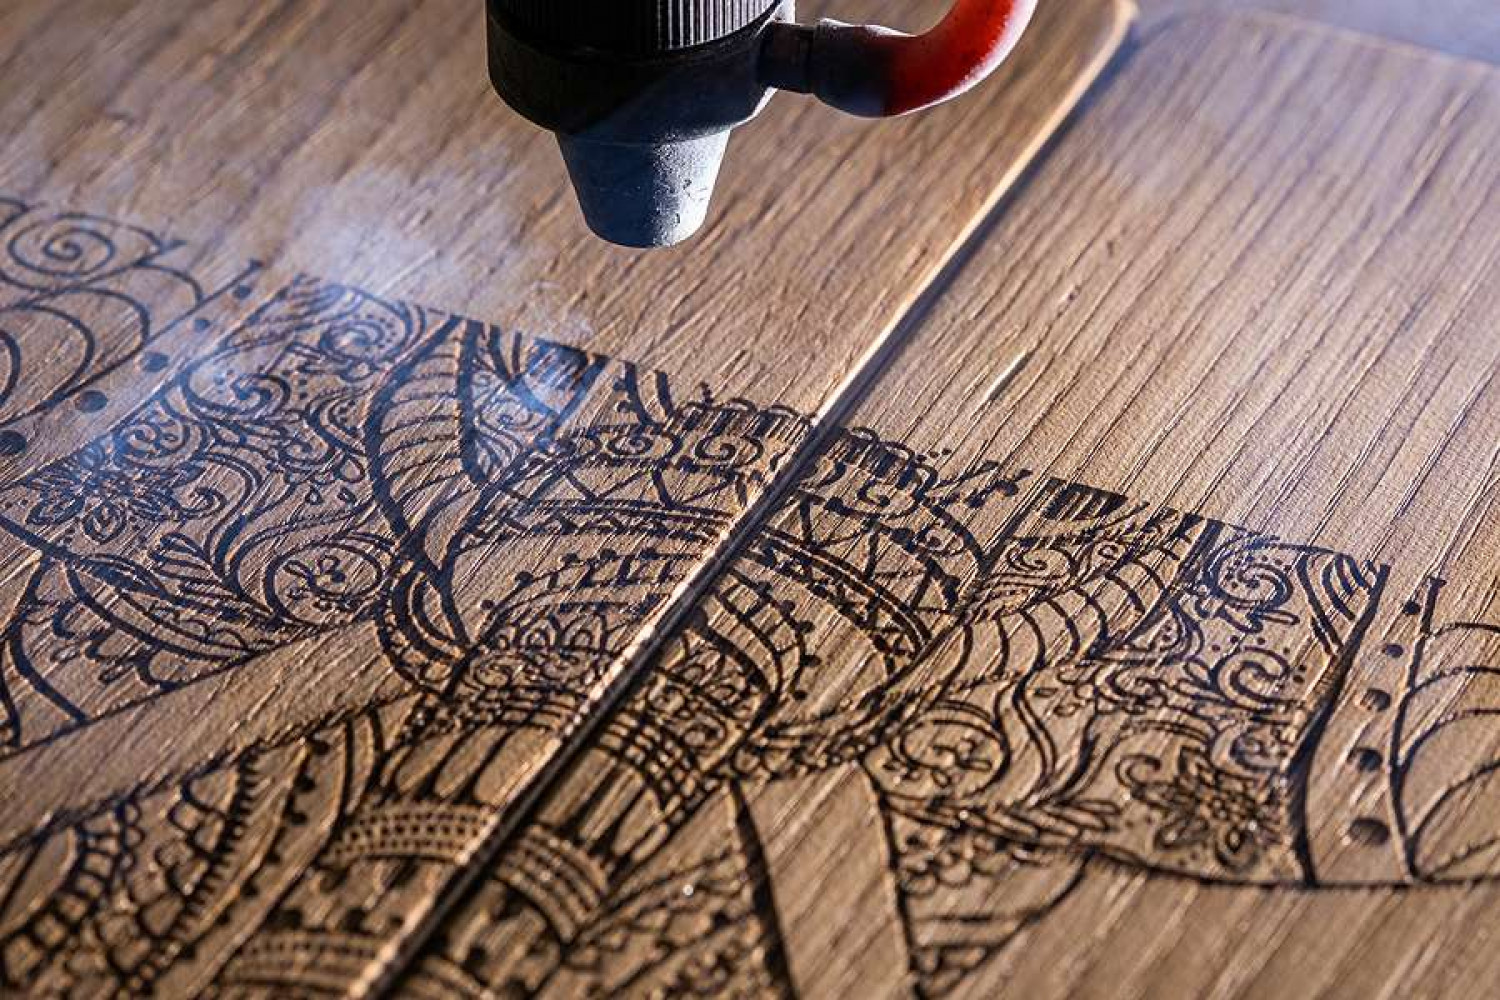 Wood cutting and engraving